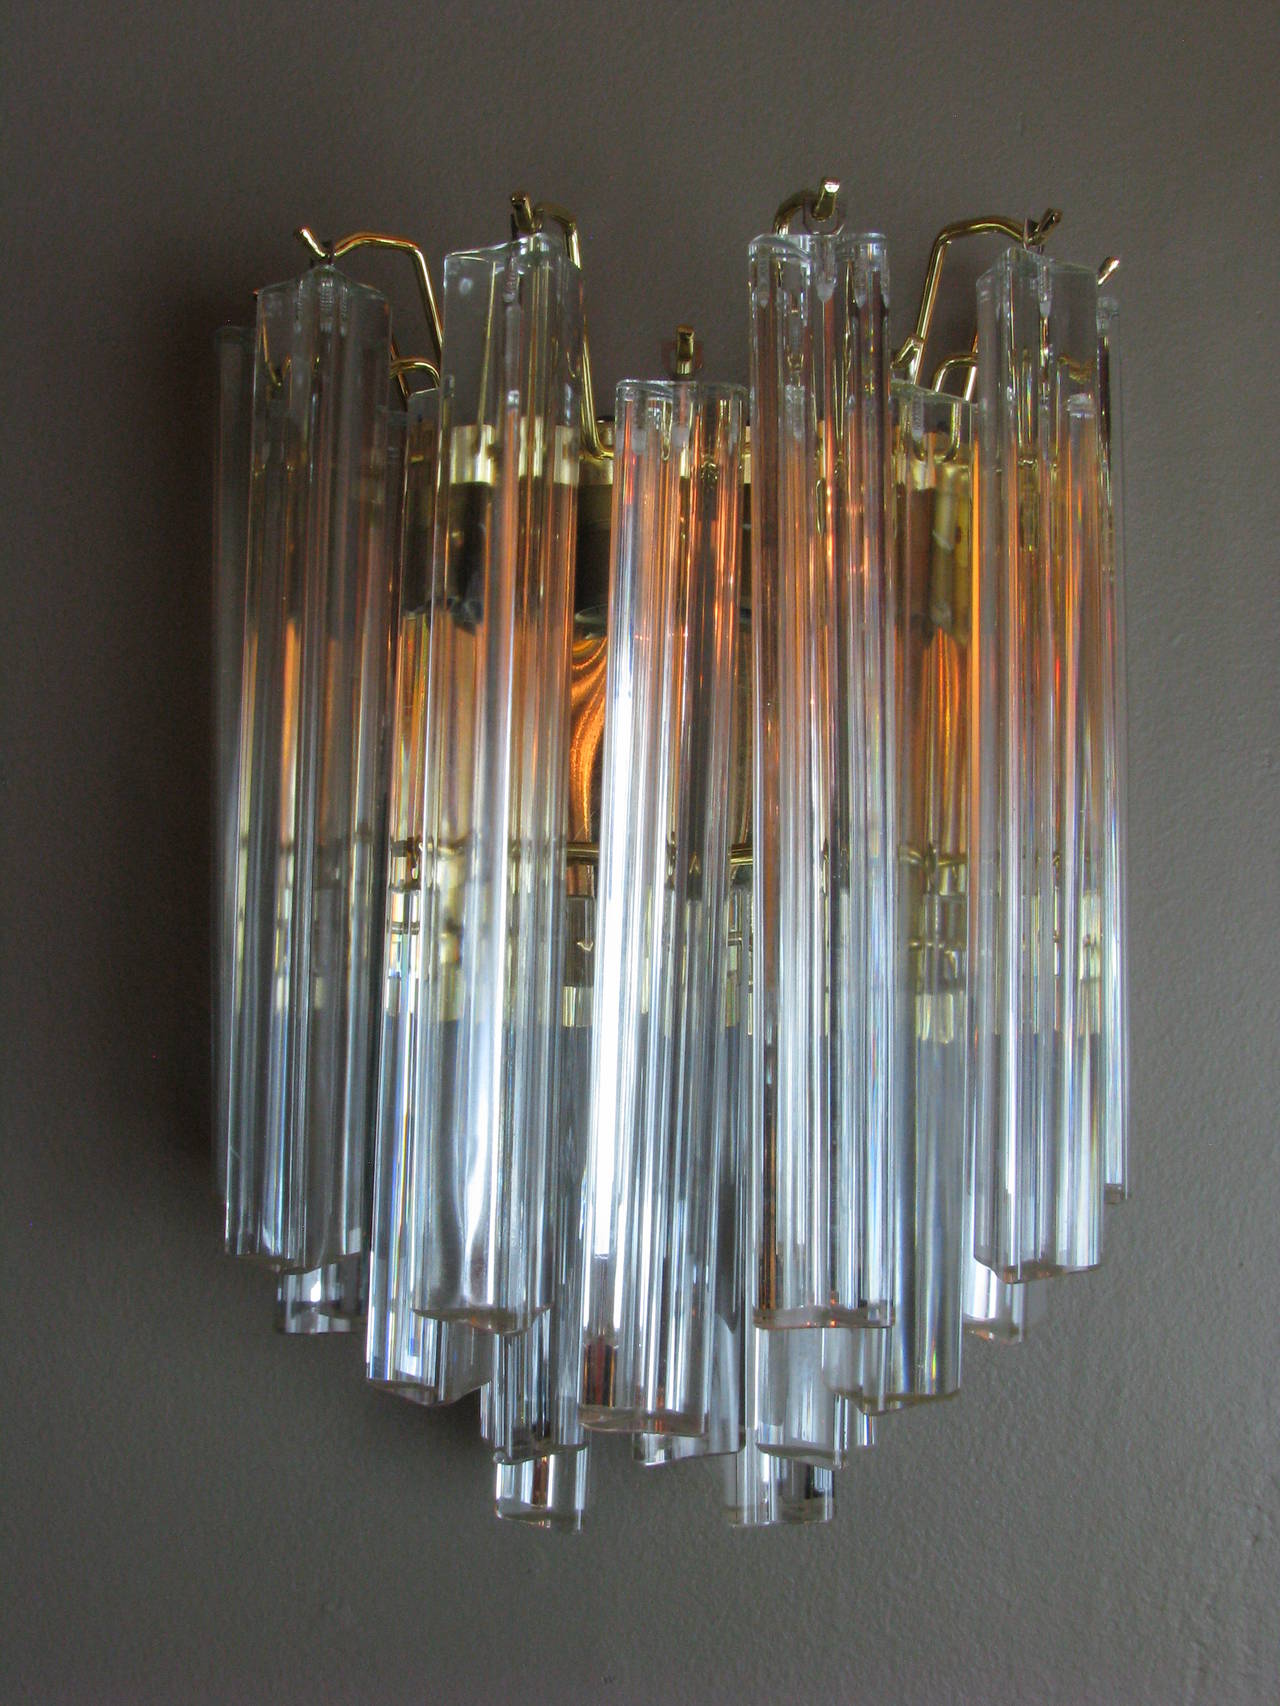 Luxe Set of 8 Venini Sconces
2 candela type bulbs/each sconce
Purchased North of Milano, Italy from President's hotel in Brescia area. The hotel originally opened in 1960 and closed in fall of 2013.